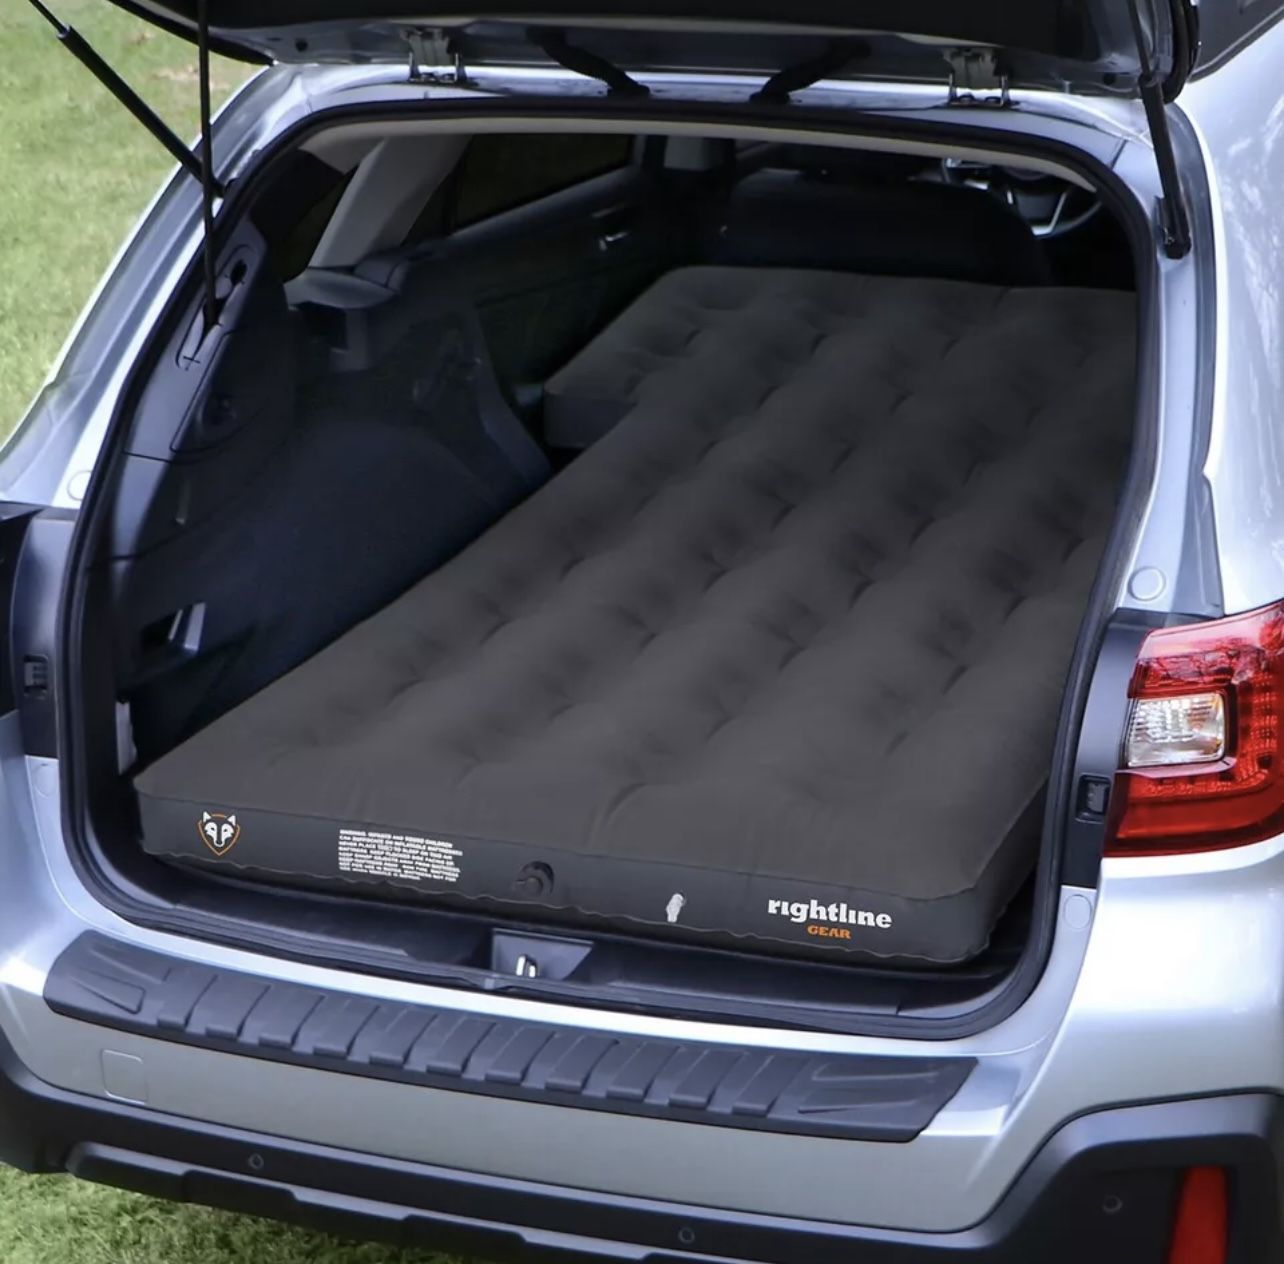 Rightline Gear SUV Car Air Mattress Pad with Air Pump - Certified Refurbished open box